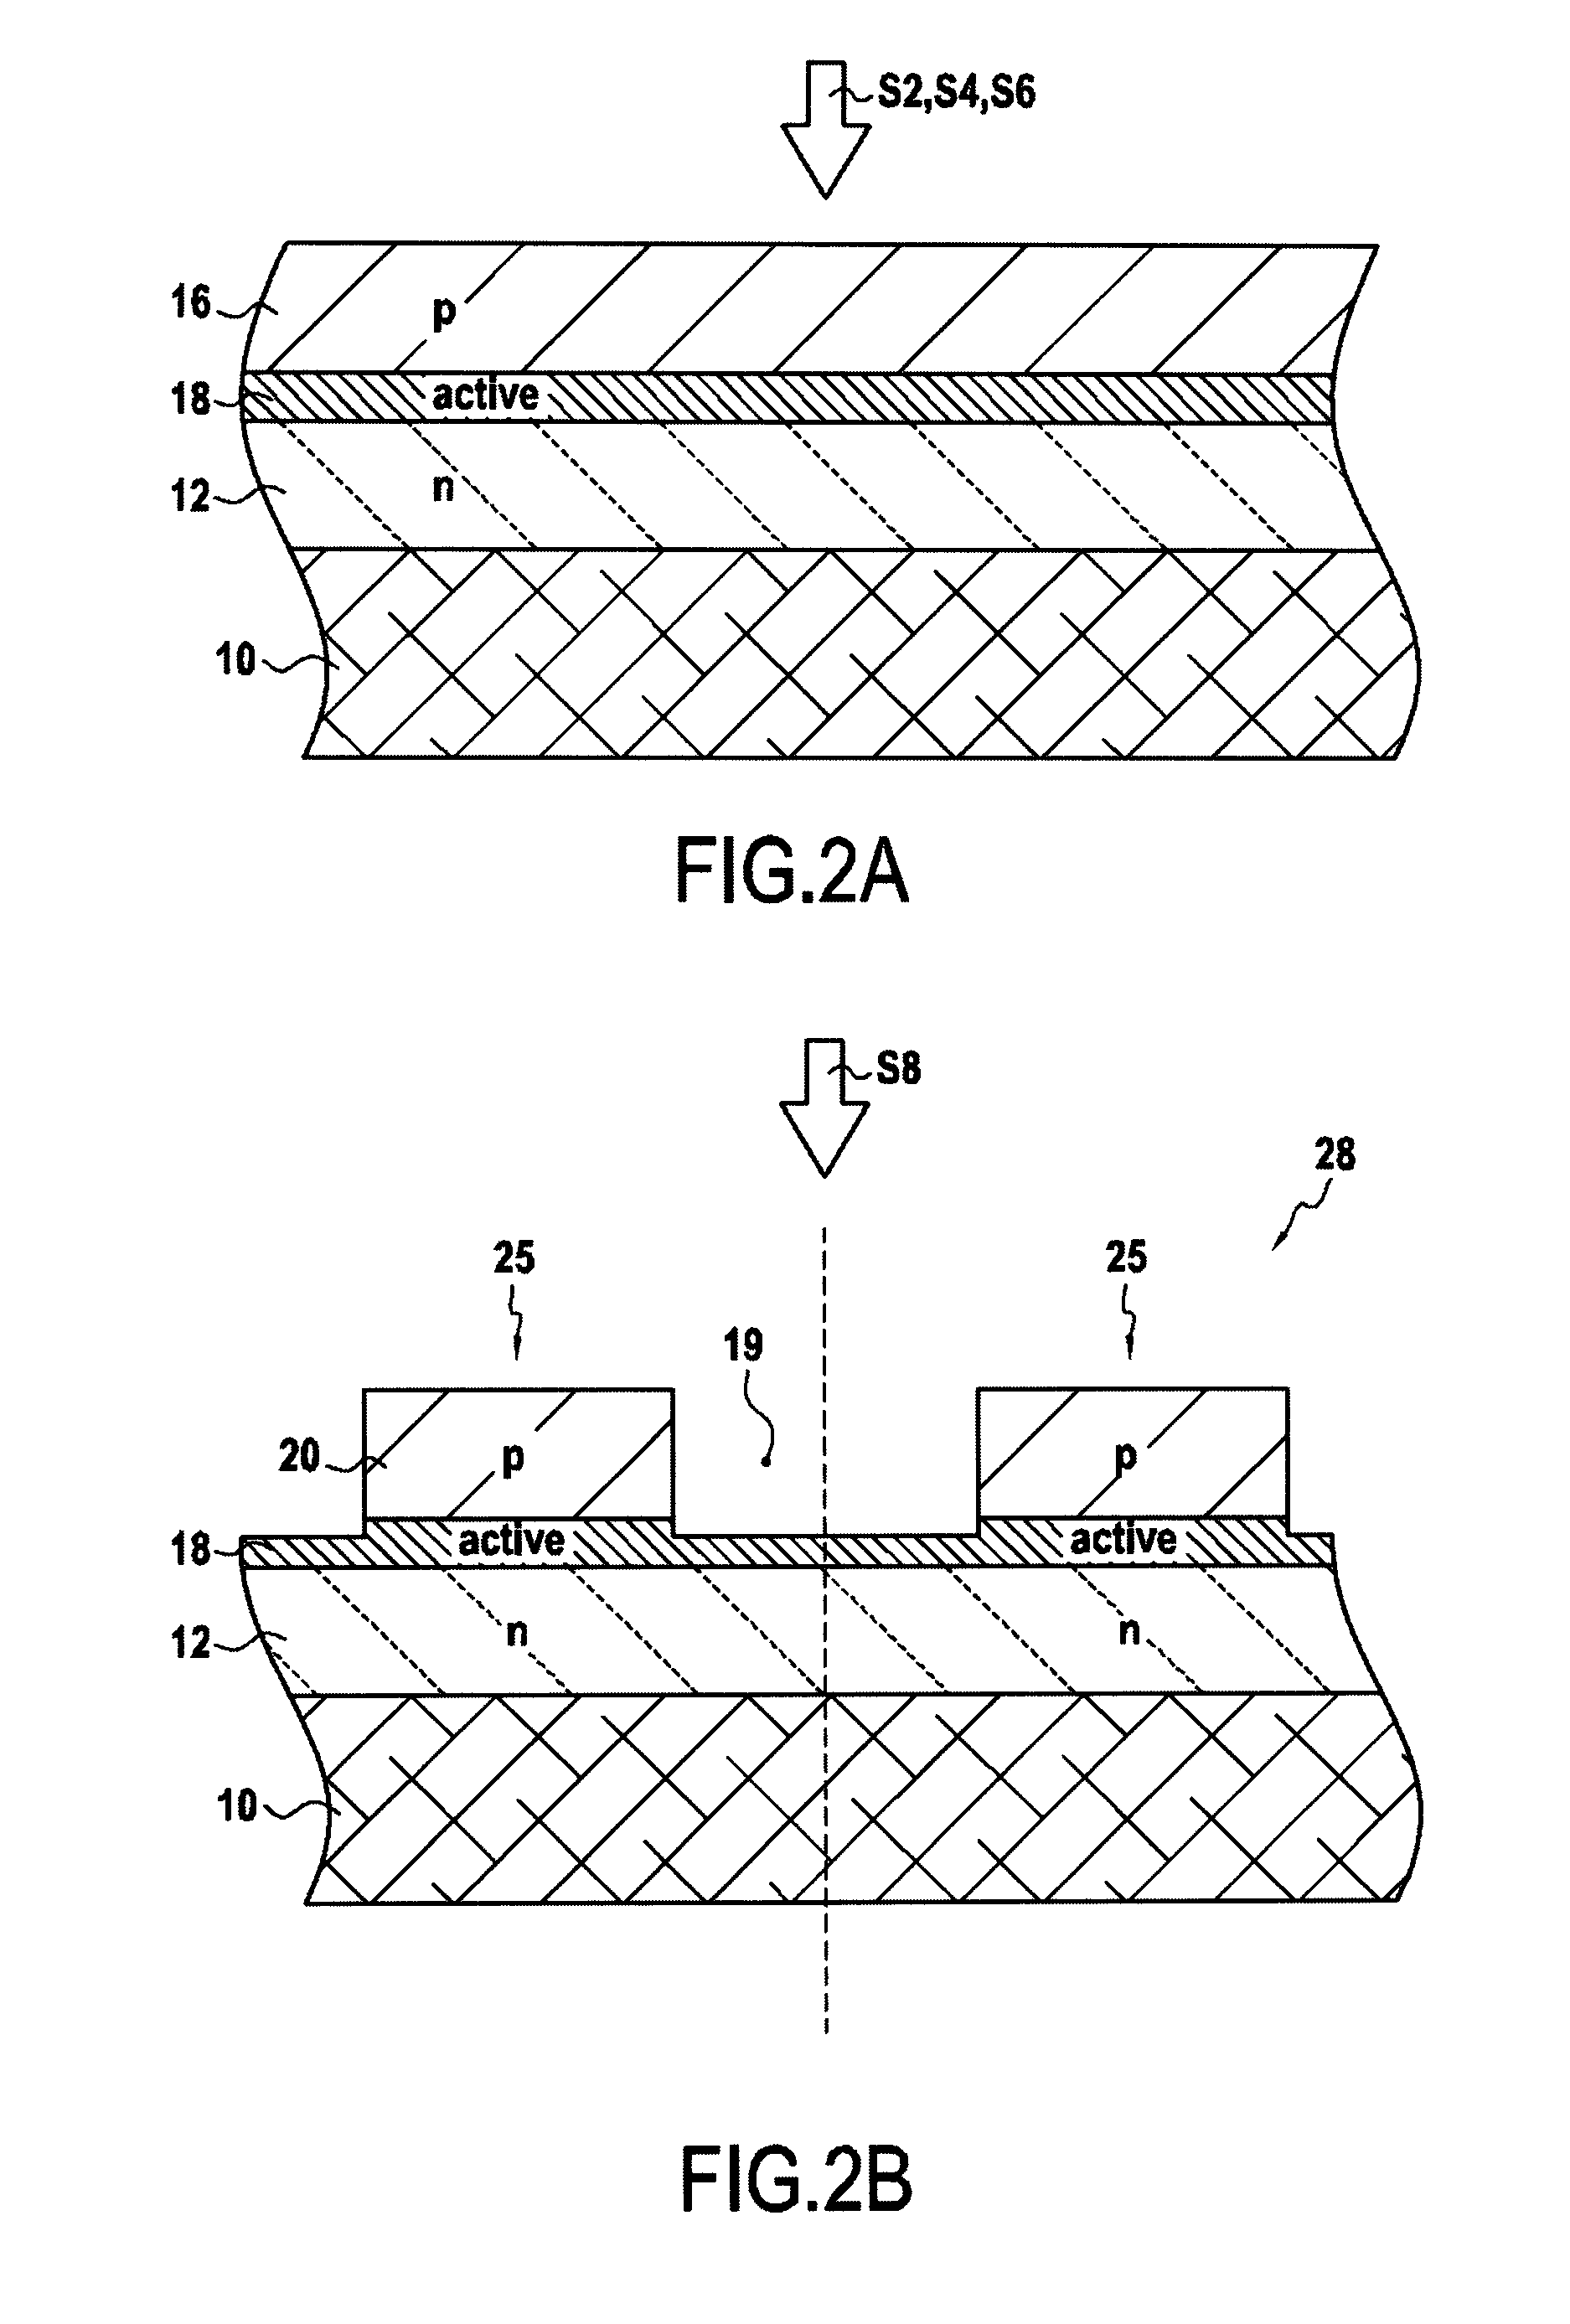 Method of manufacturing structures of leds or solar cells